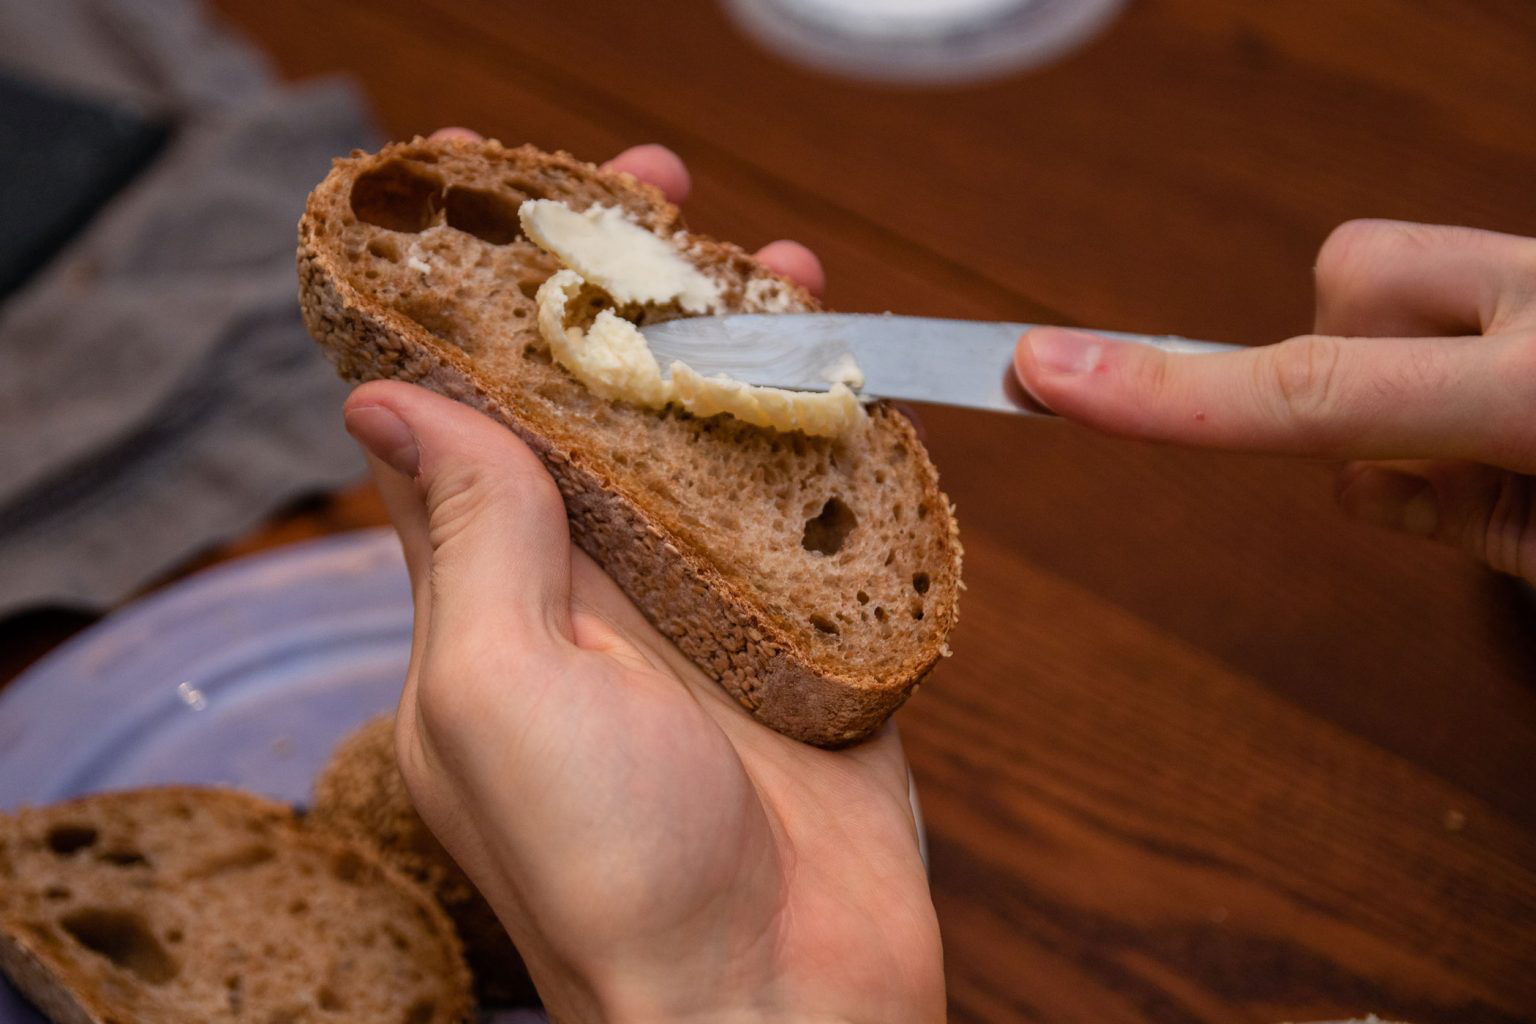 A person buttering a slice of bread.